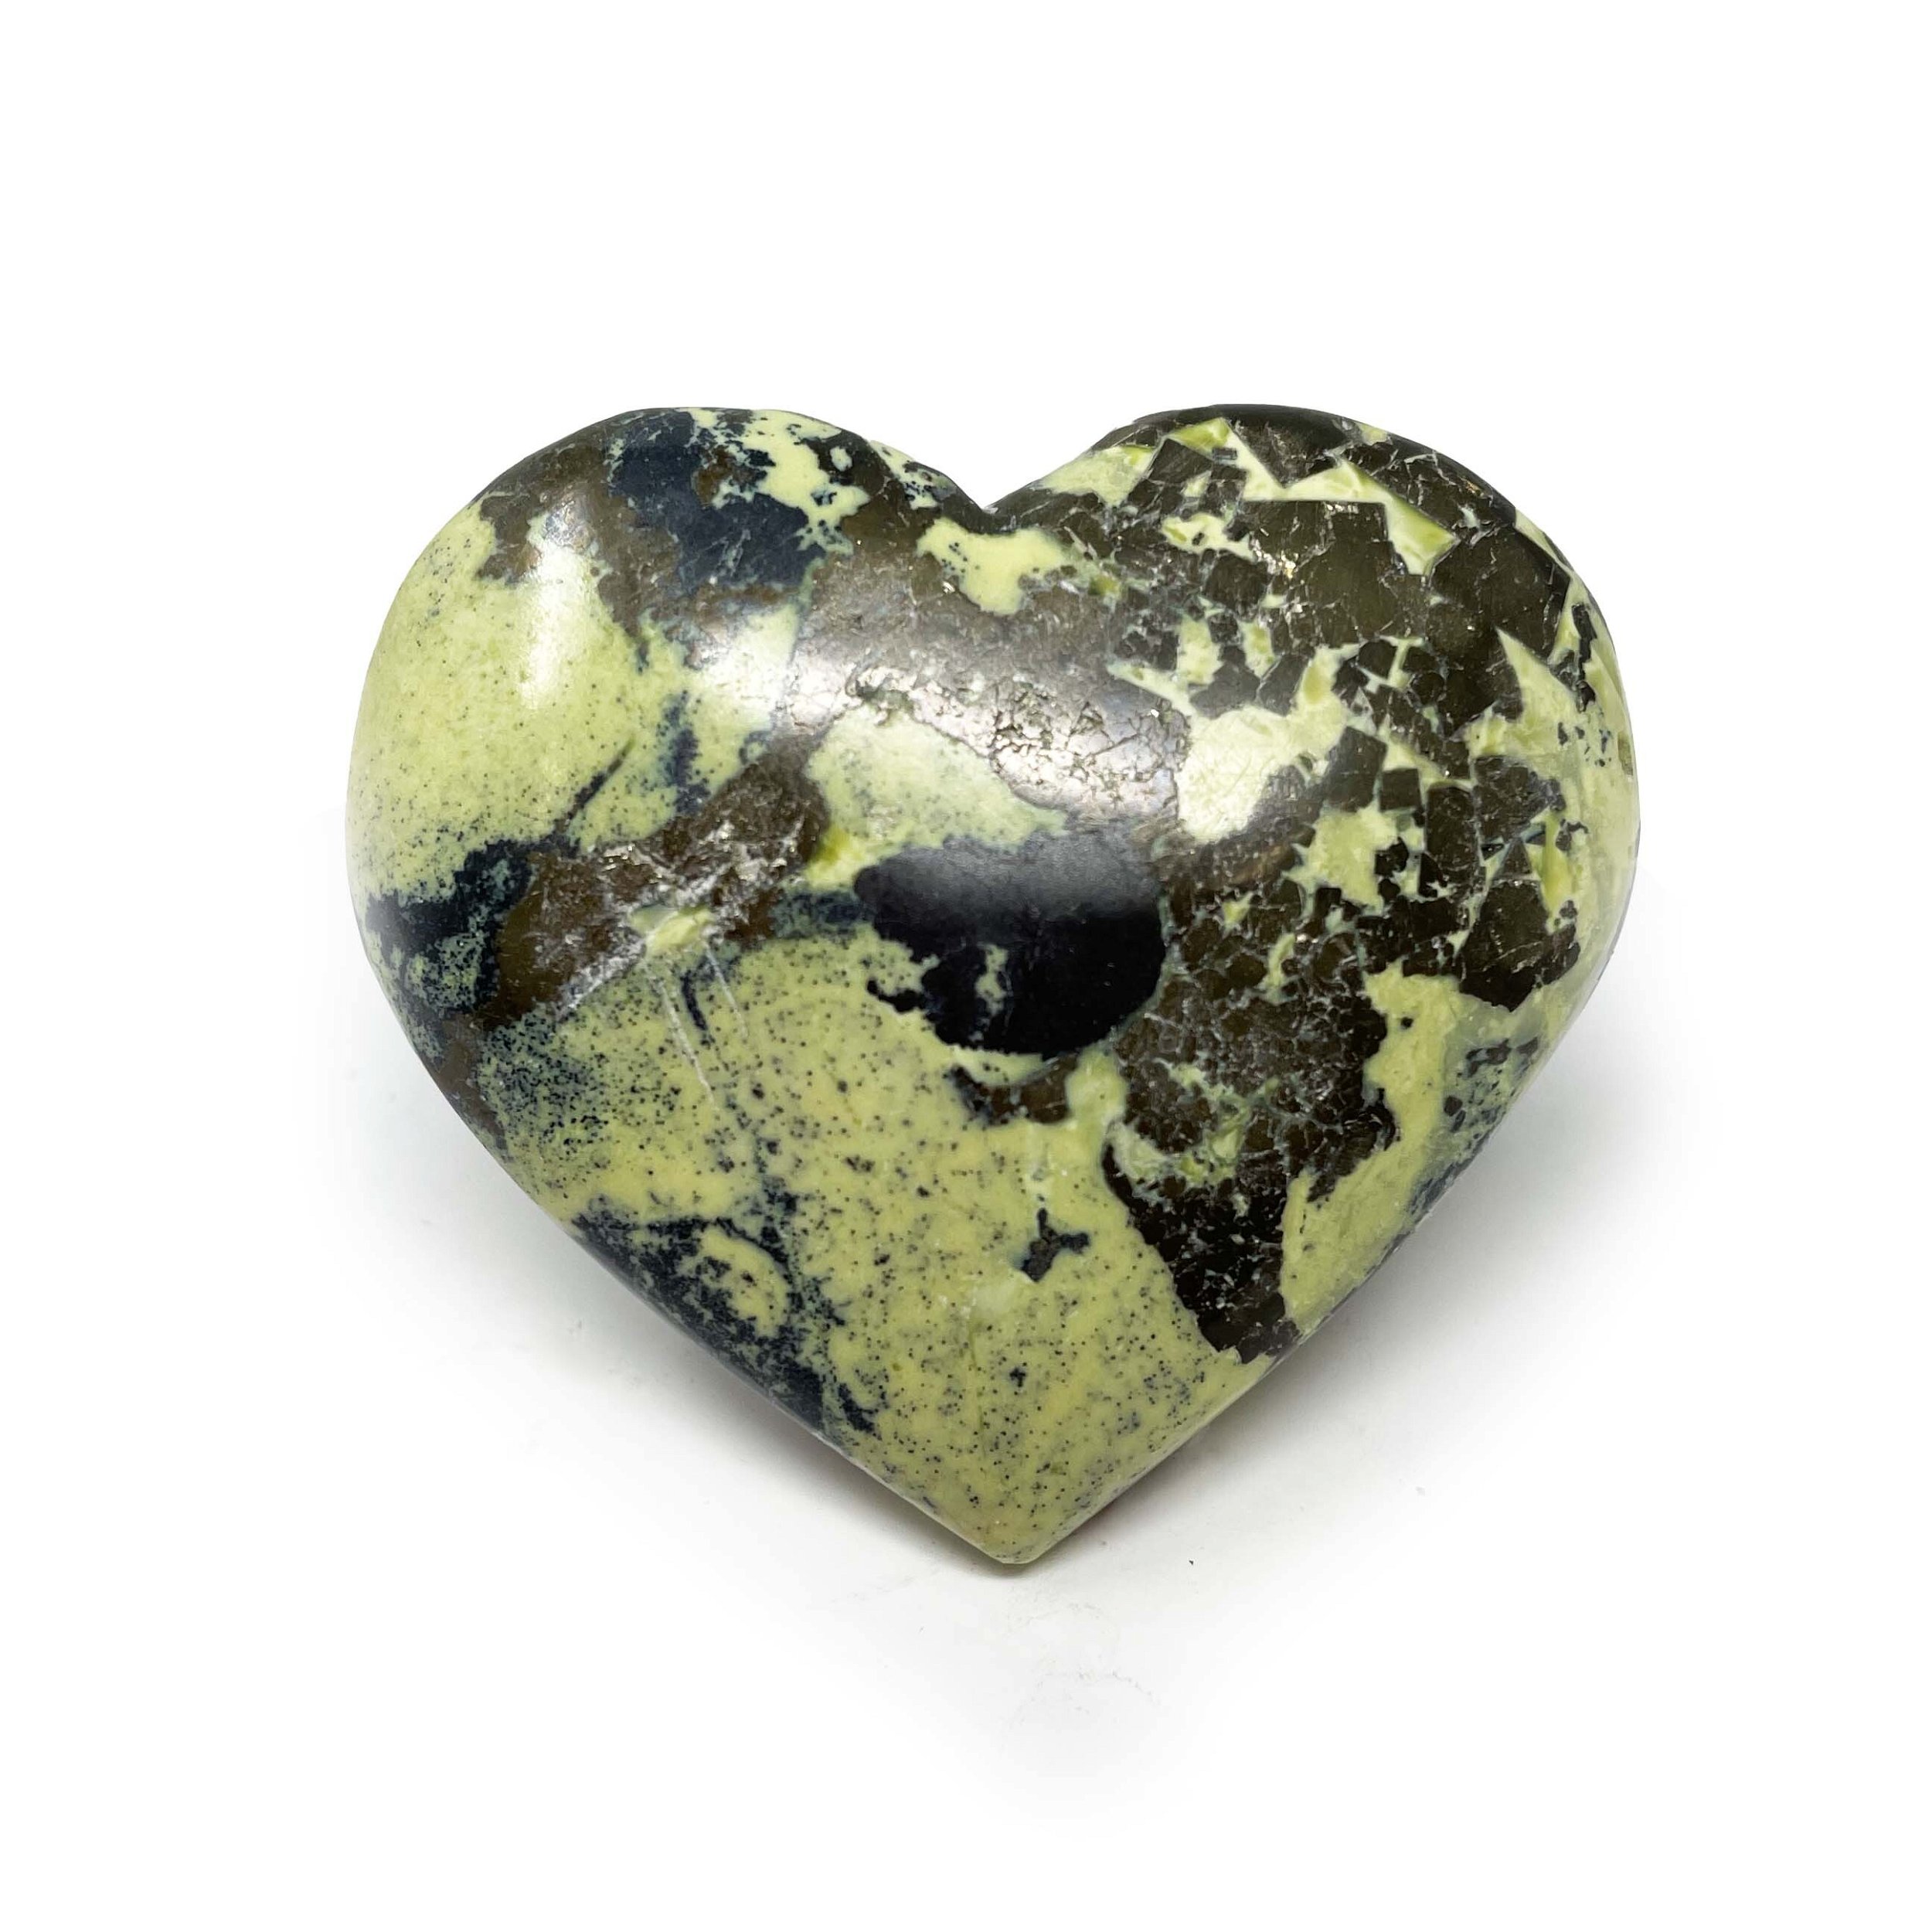 Green Serpentine Heart With Pyrite Inclusions